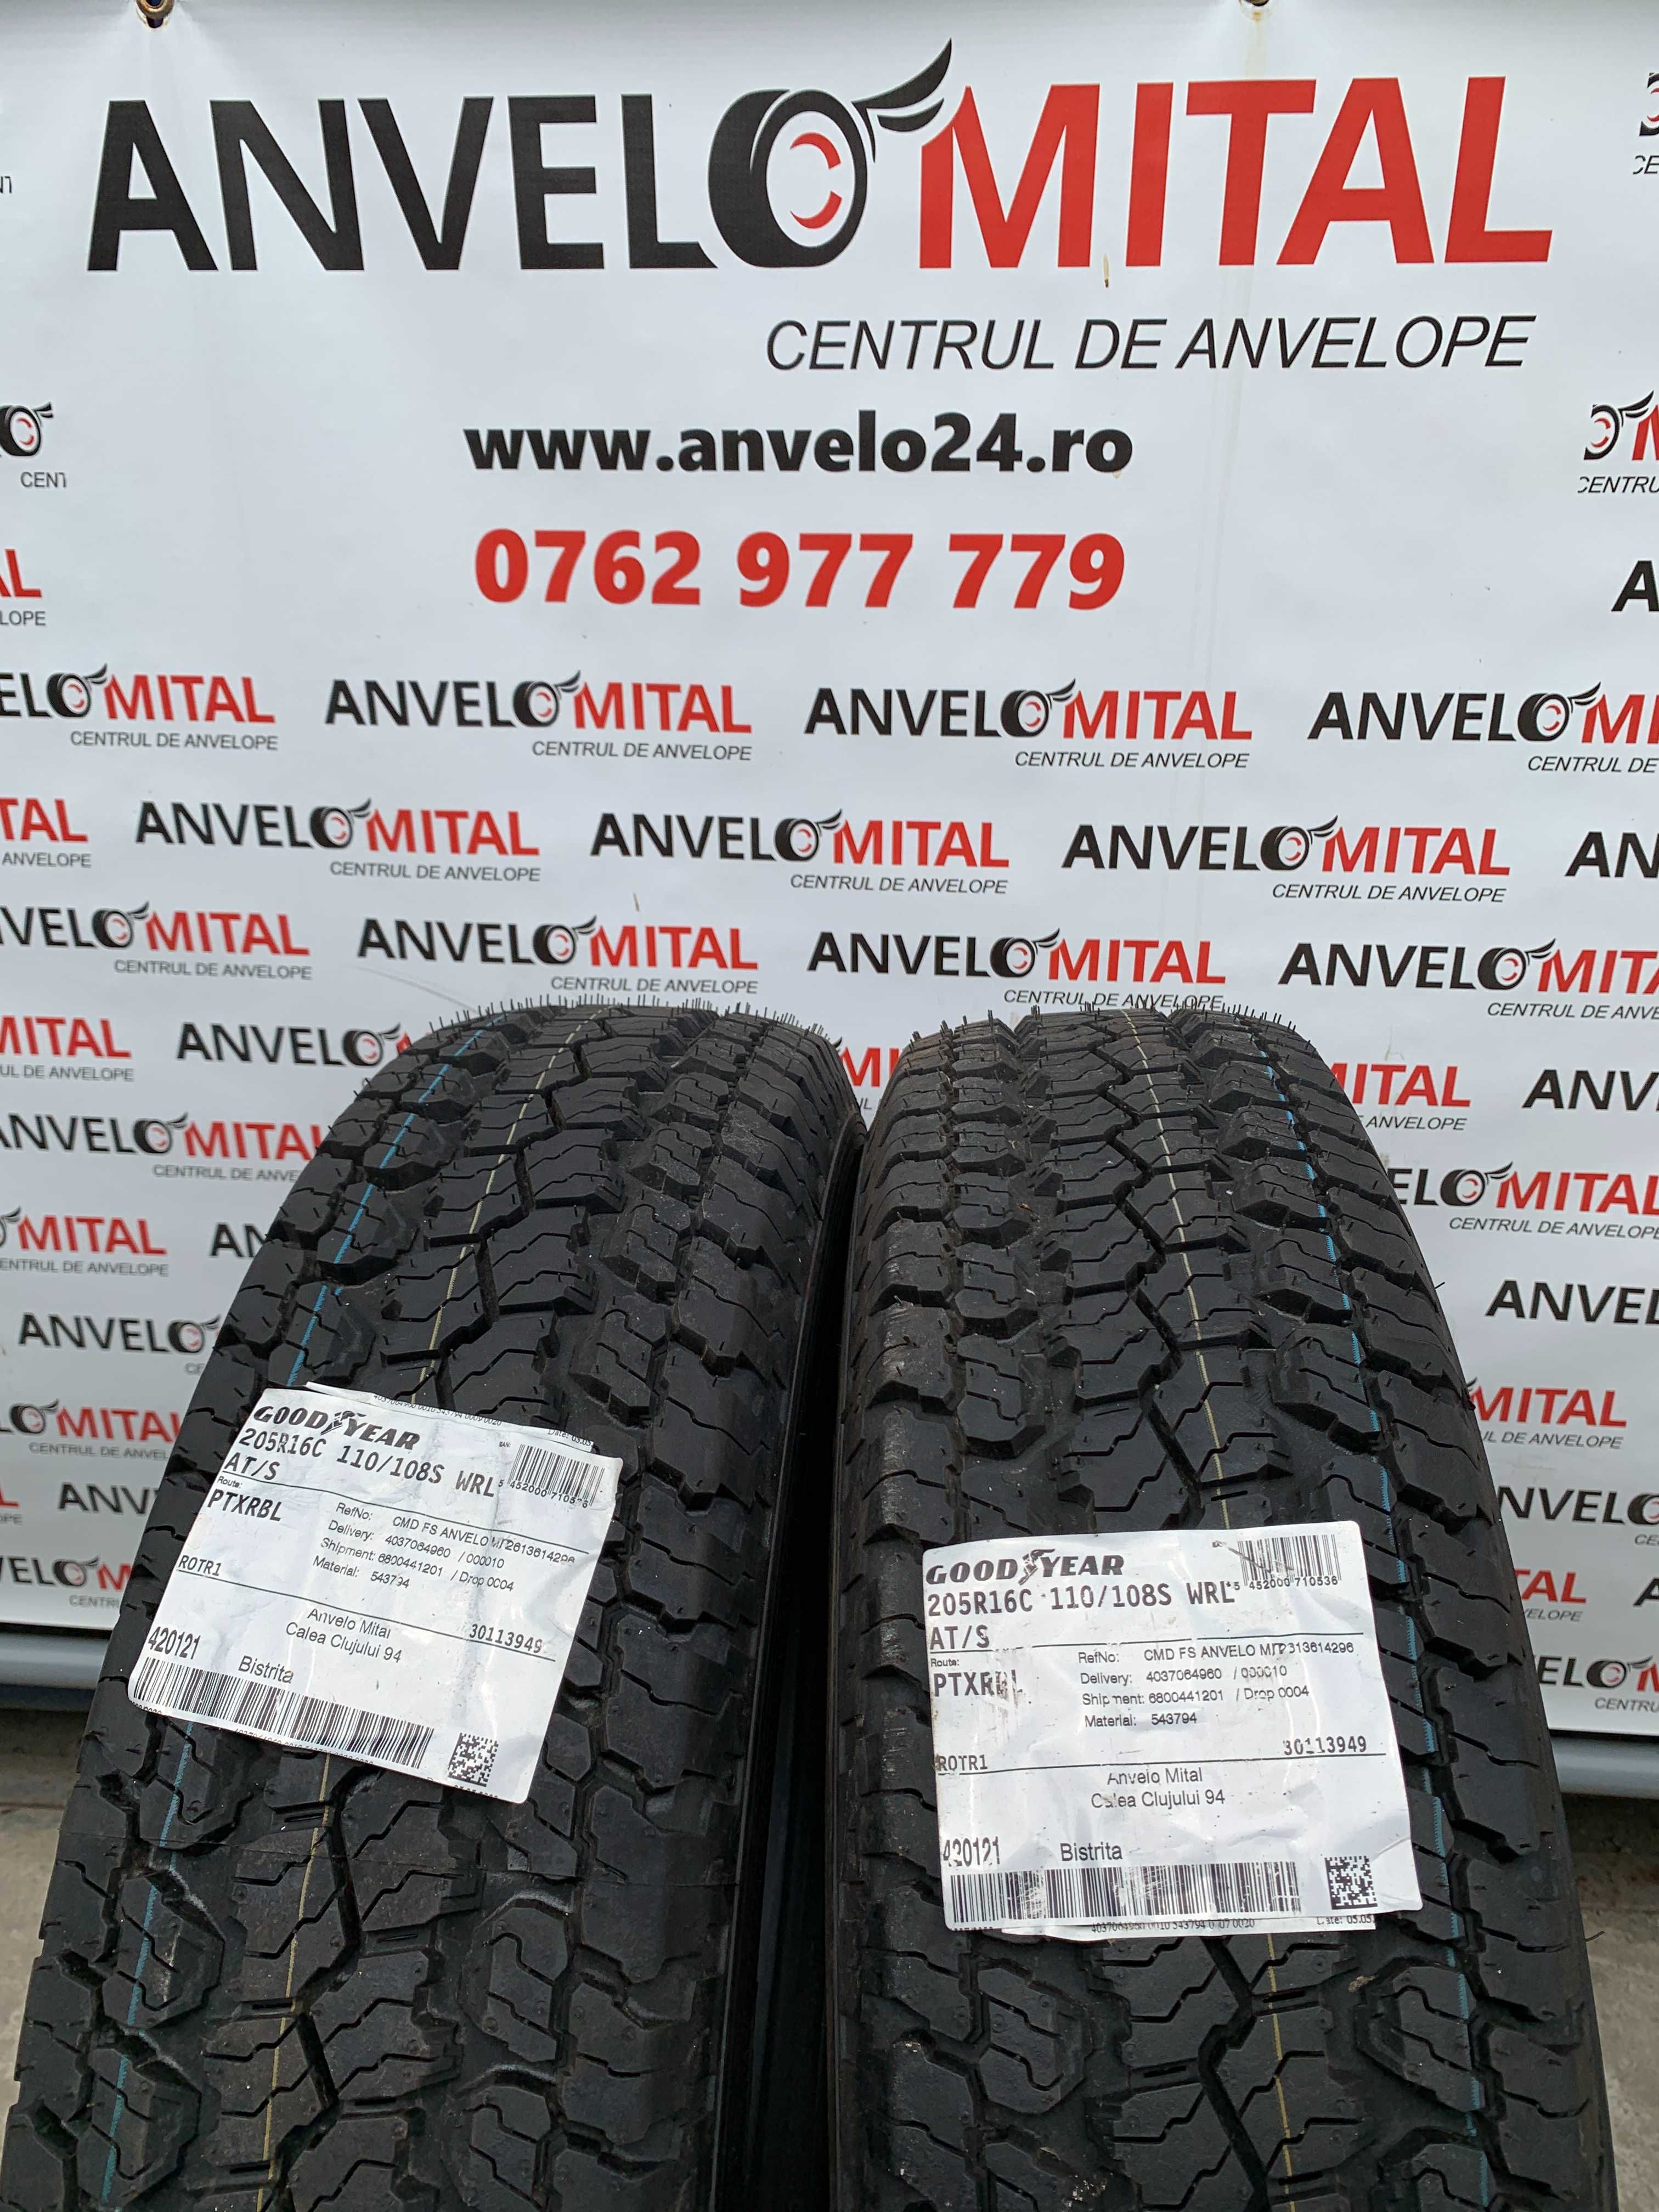 Anvelope 205/80R16C Goodyear Wrl AT/S 110/108s M+S